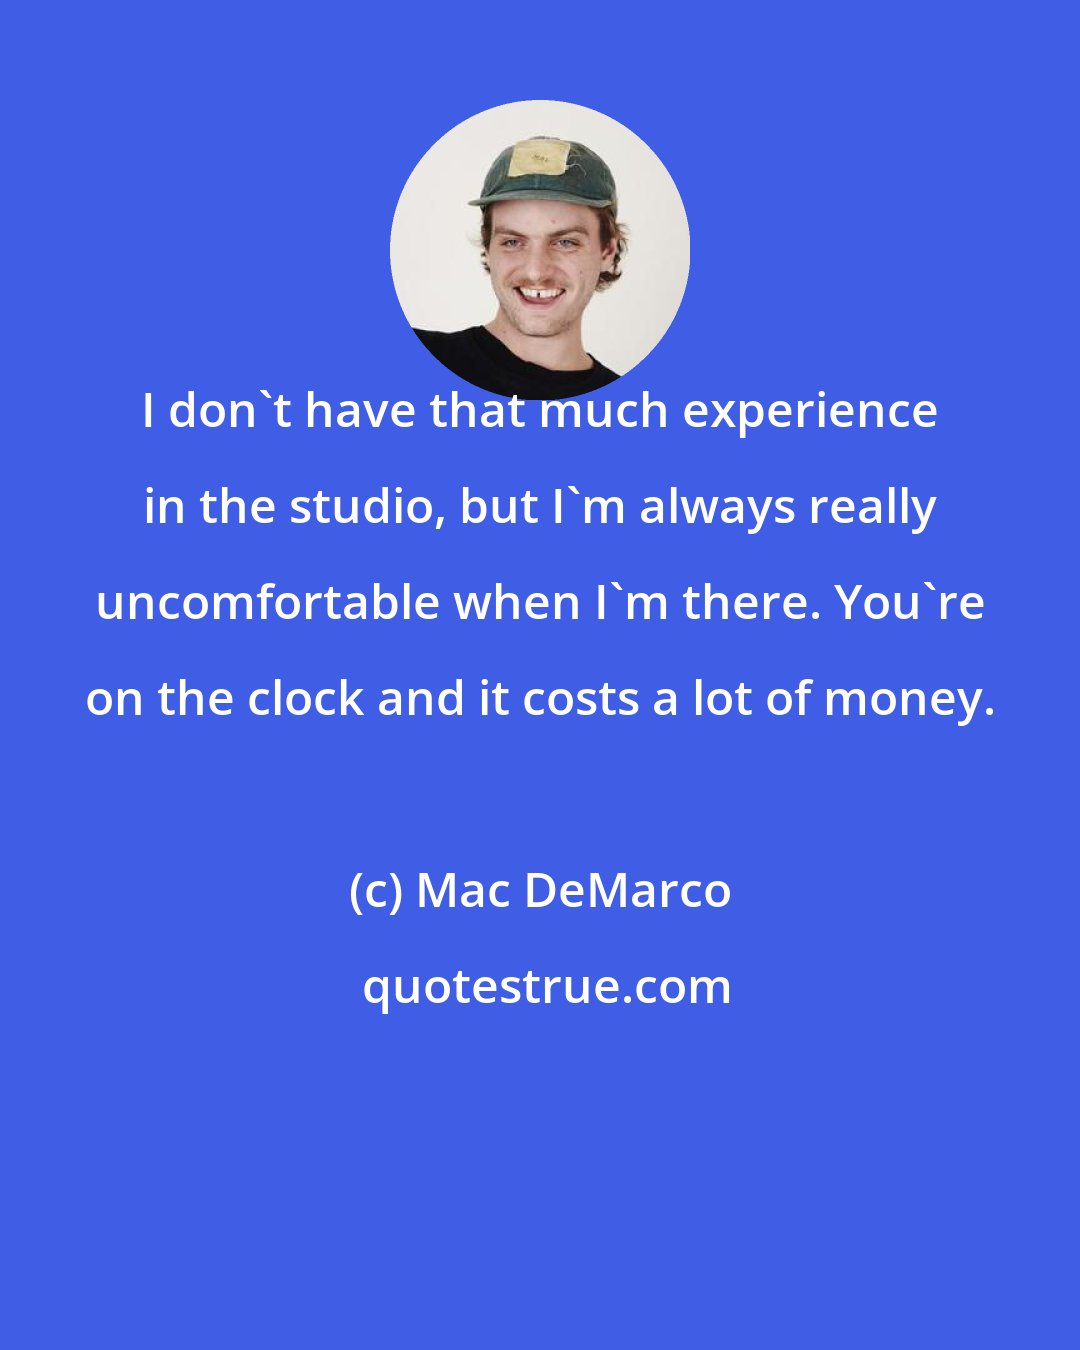 Mac DeMarco: I don't have that much experience in the studio, but I'm always really uncomfortable when I'm there. You're on the clock and it costs a lot of money.